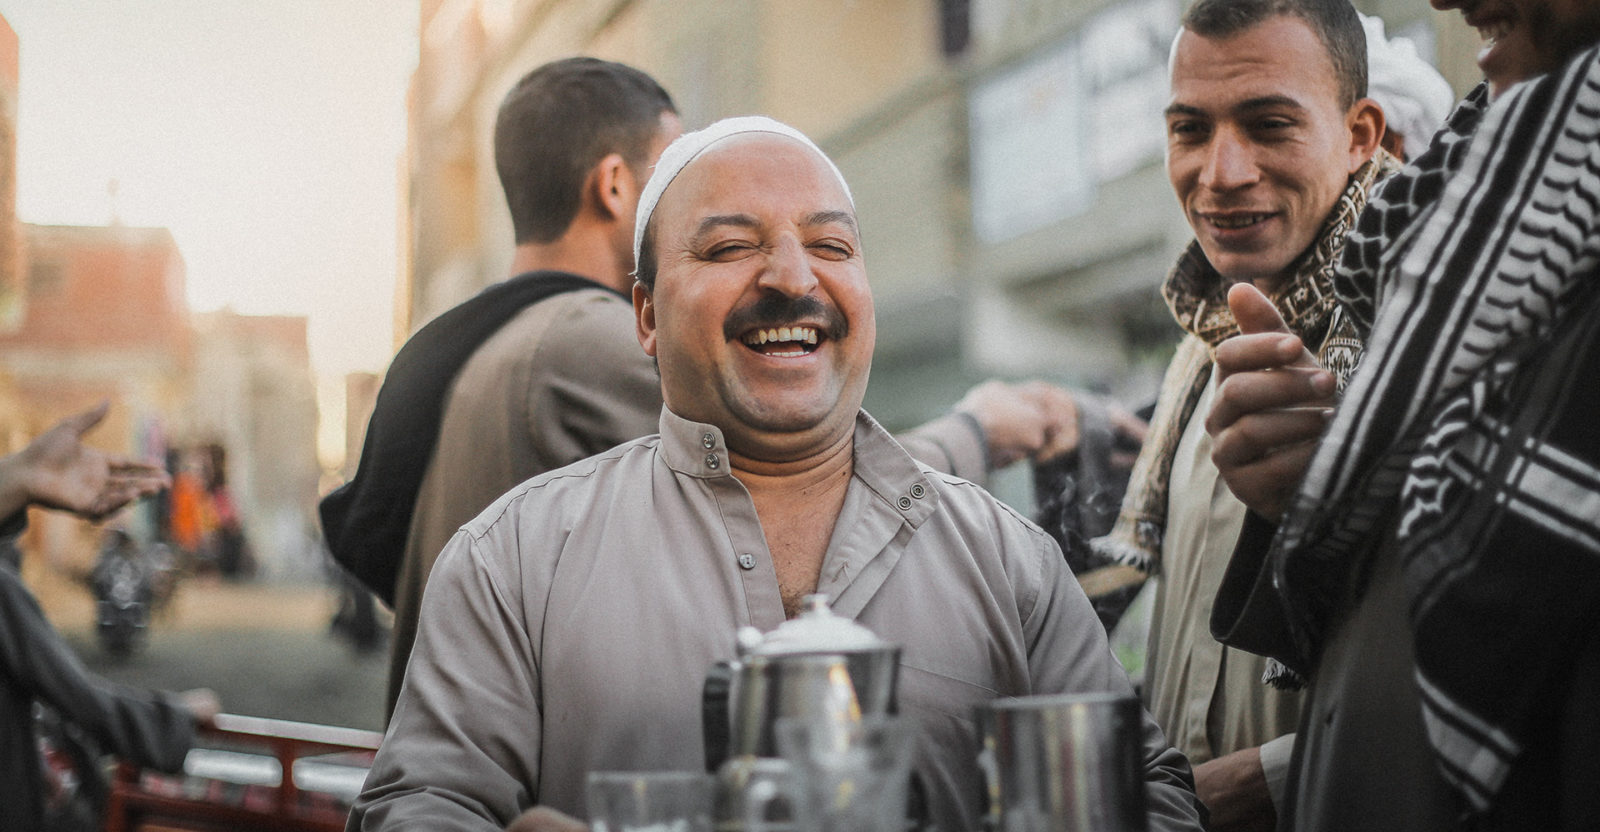 A man in Egypt laughing and holding a tray of drinks in a crowded street